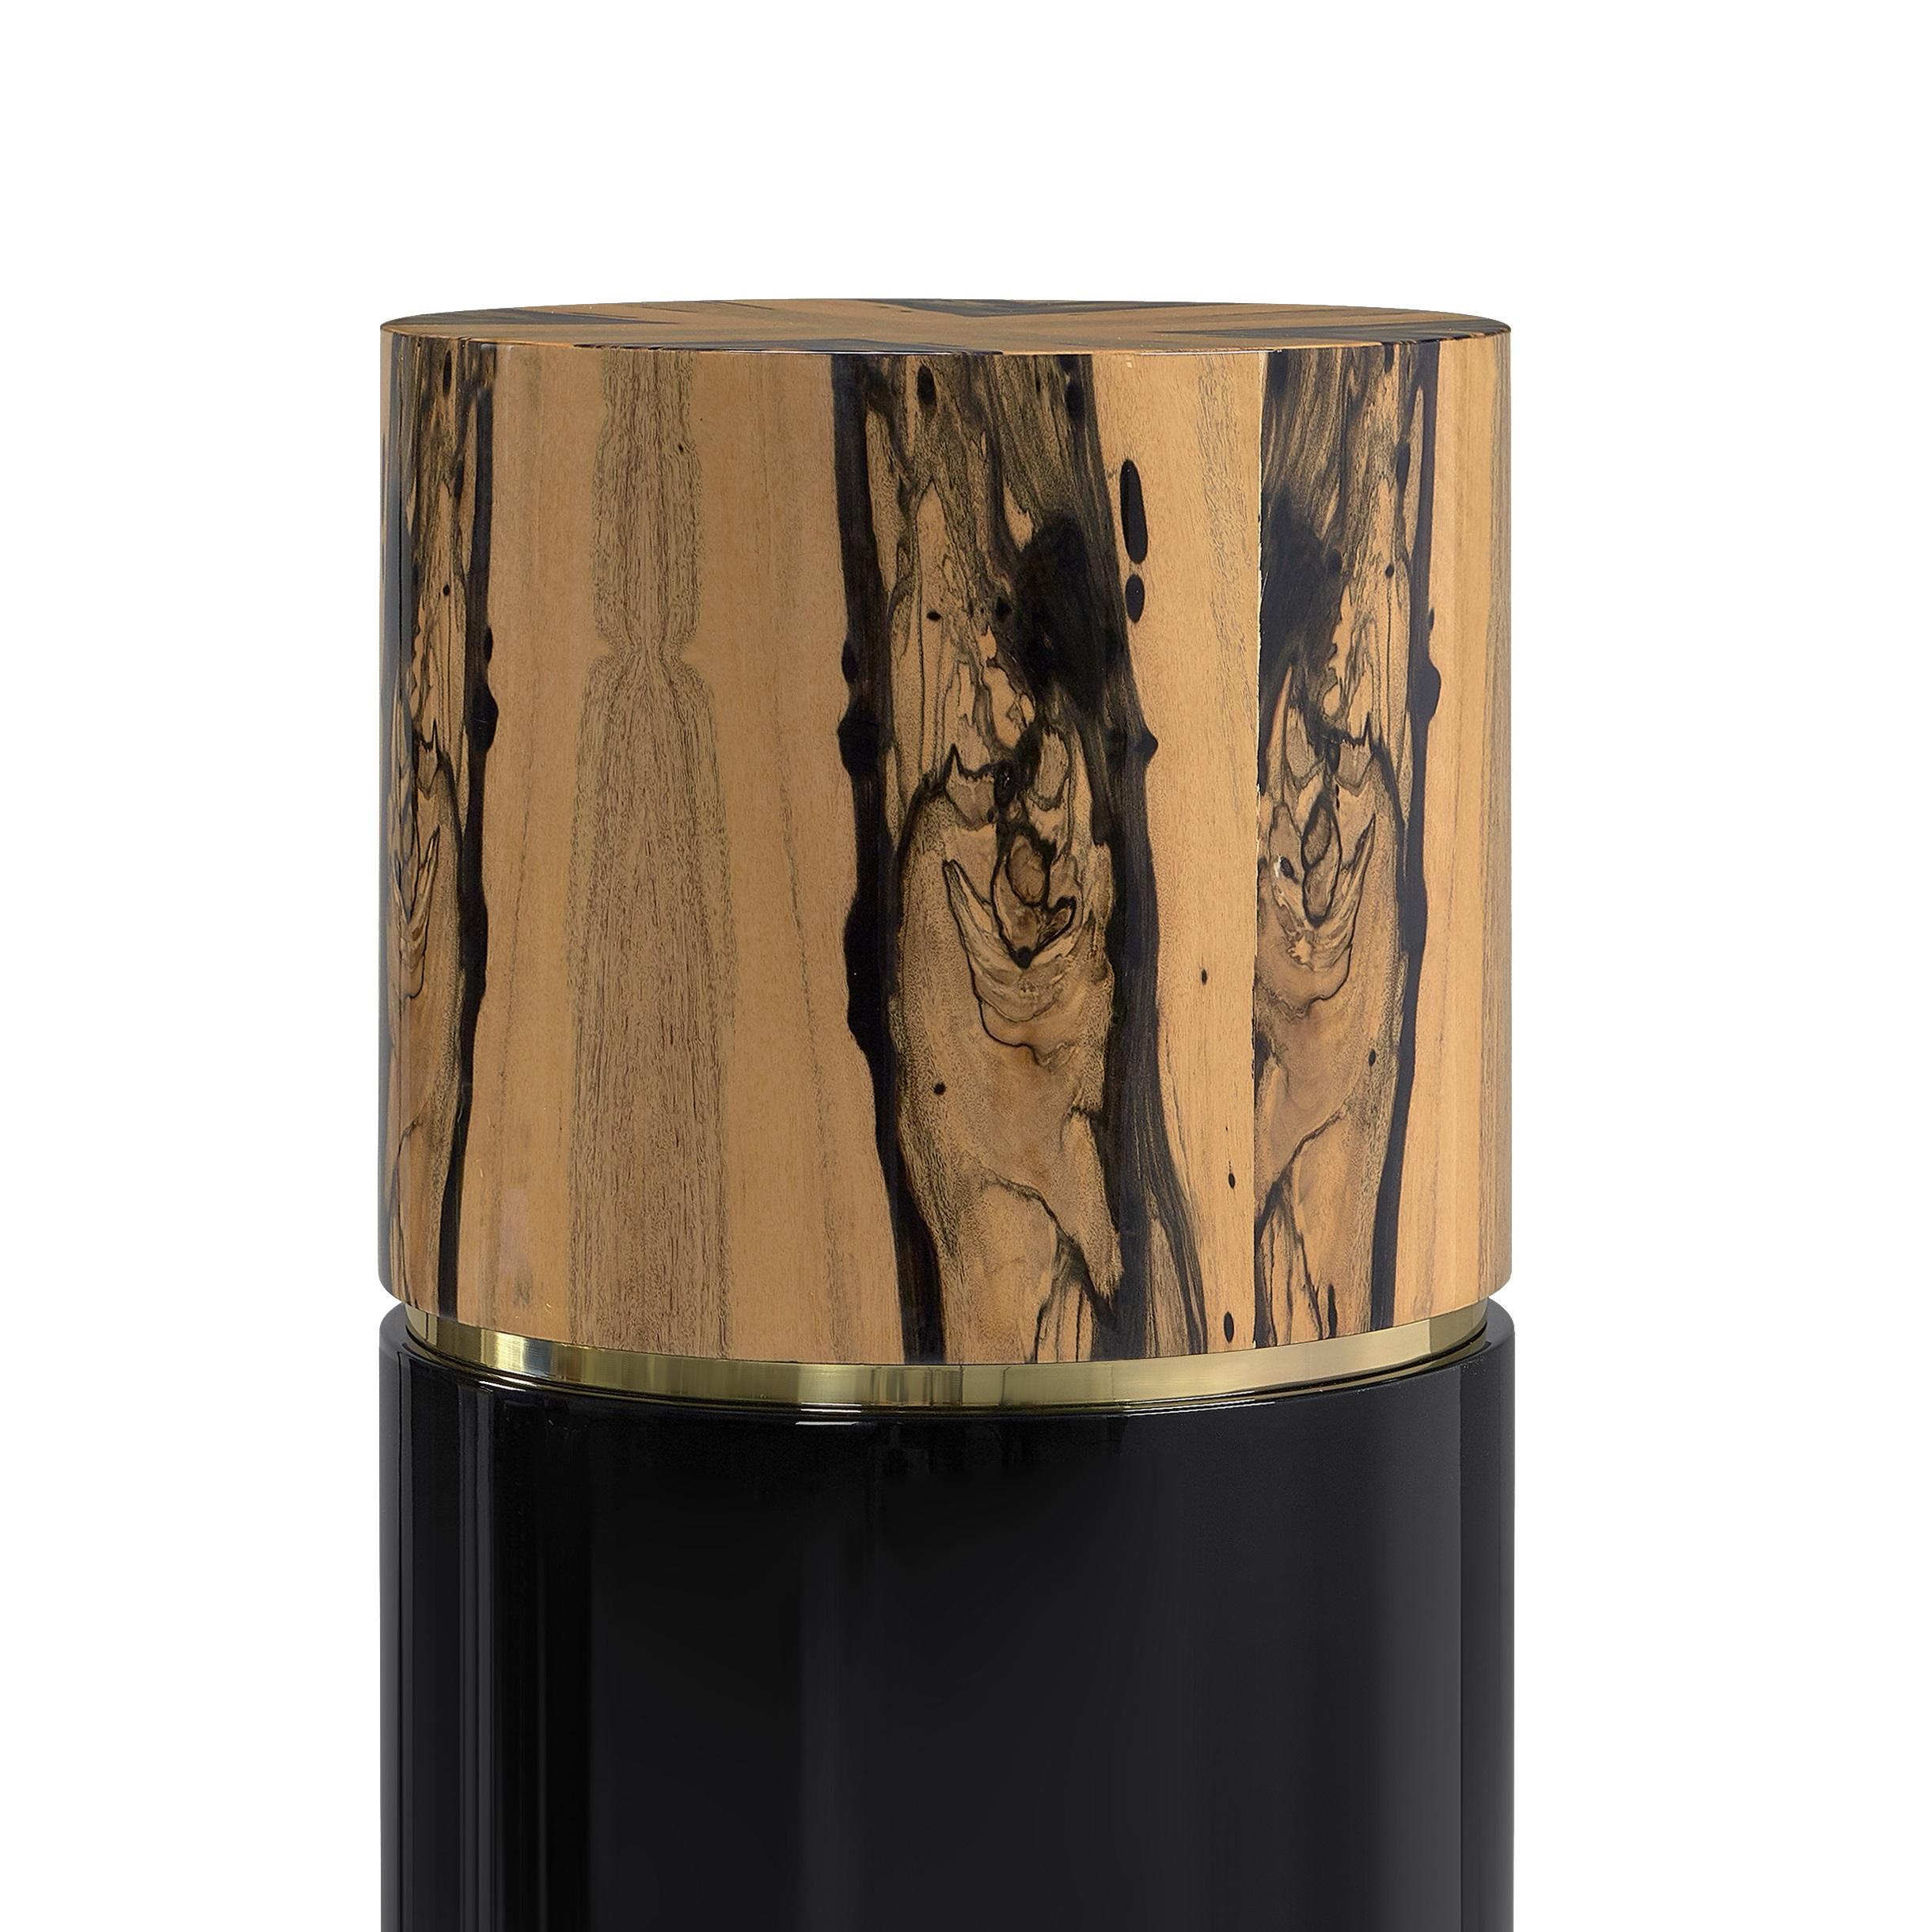 Royal Ebony Pedestal by Memoir Essence
Dimensions: D 35 x W 35 x H 110 cm.
Materials: Polished brass, lacquer and Royal ebony.

Also available in brushed brass. Please contact us.

An exquisite combination of royal ebony veneer and black lacquered